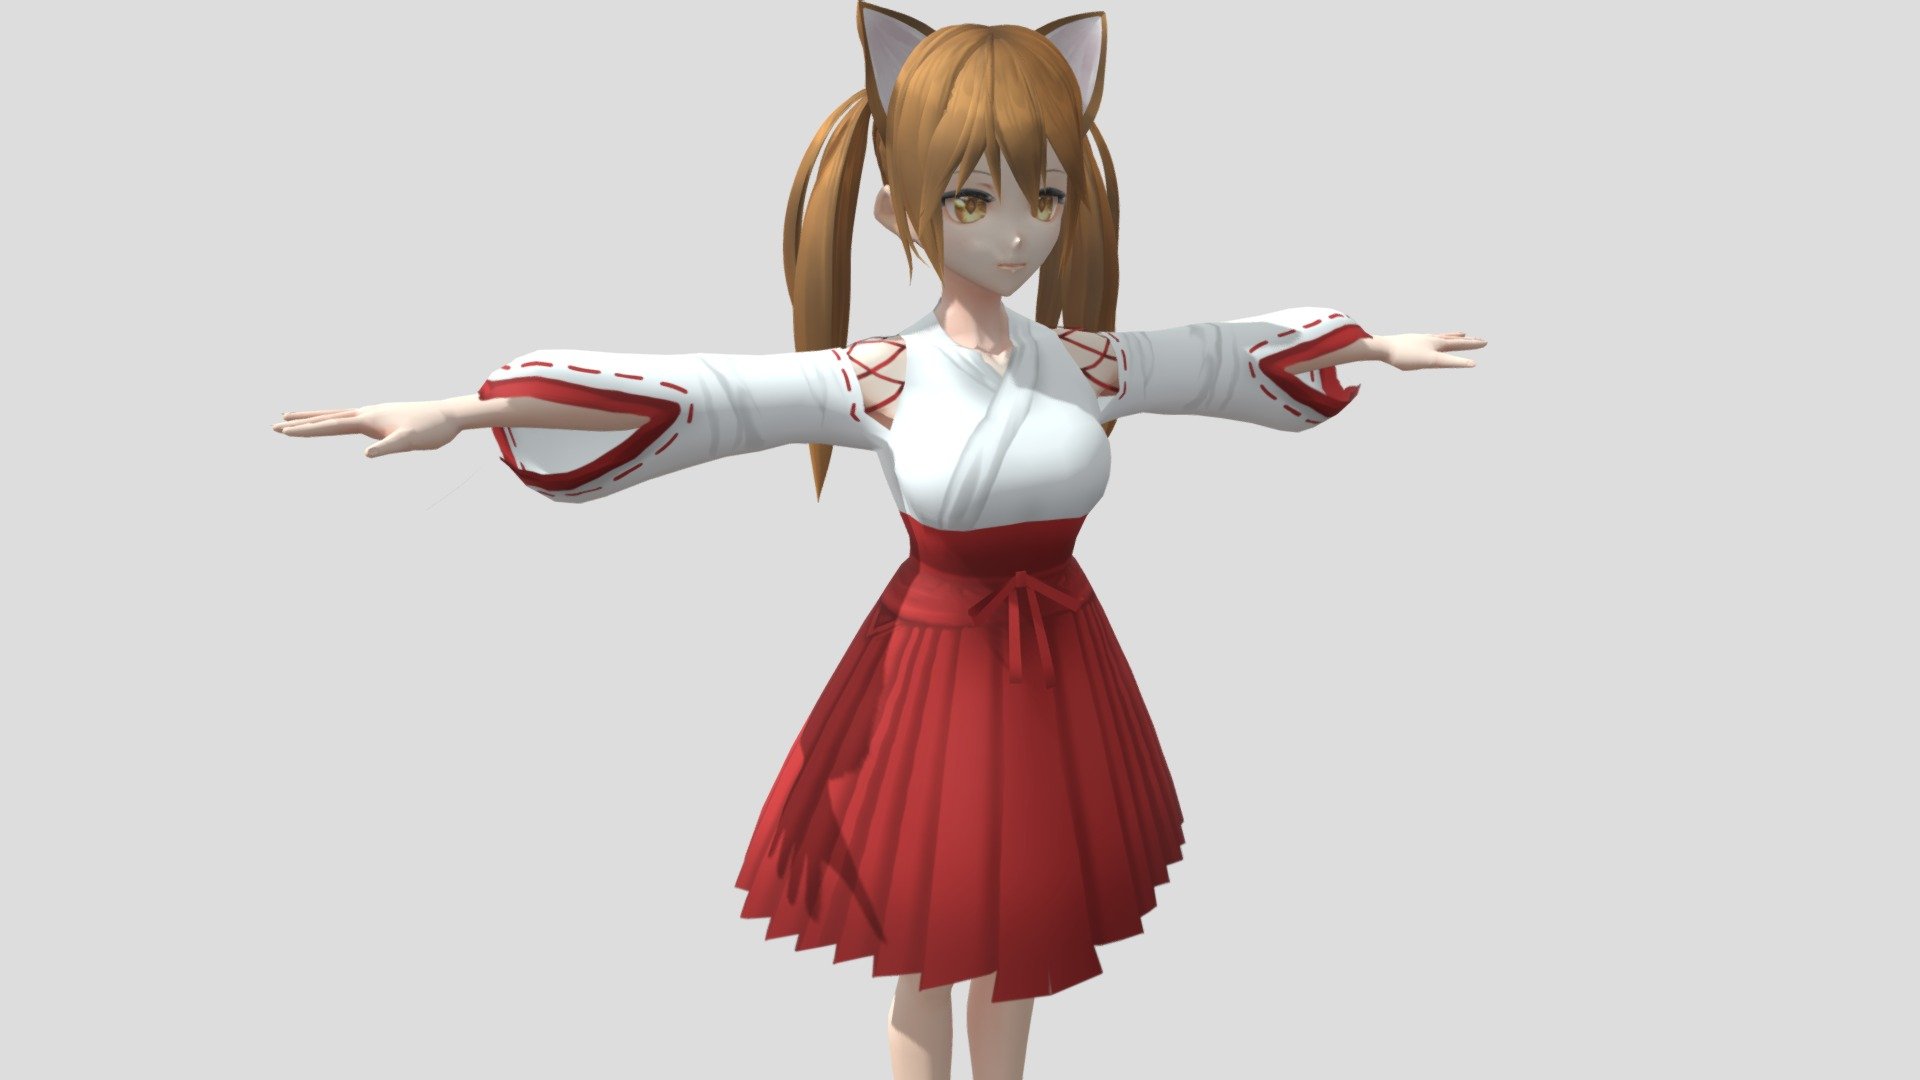 Anime Character】Maple (Miko/Unity 3D) - 3D model by 3D動漫風角色屋 / 3D Anime  Character Store (@alex94i60) [9e53879]